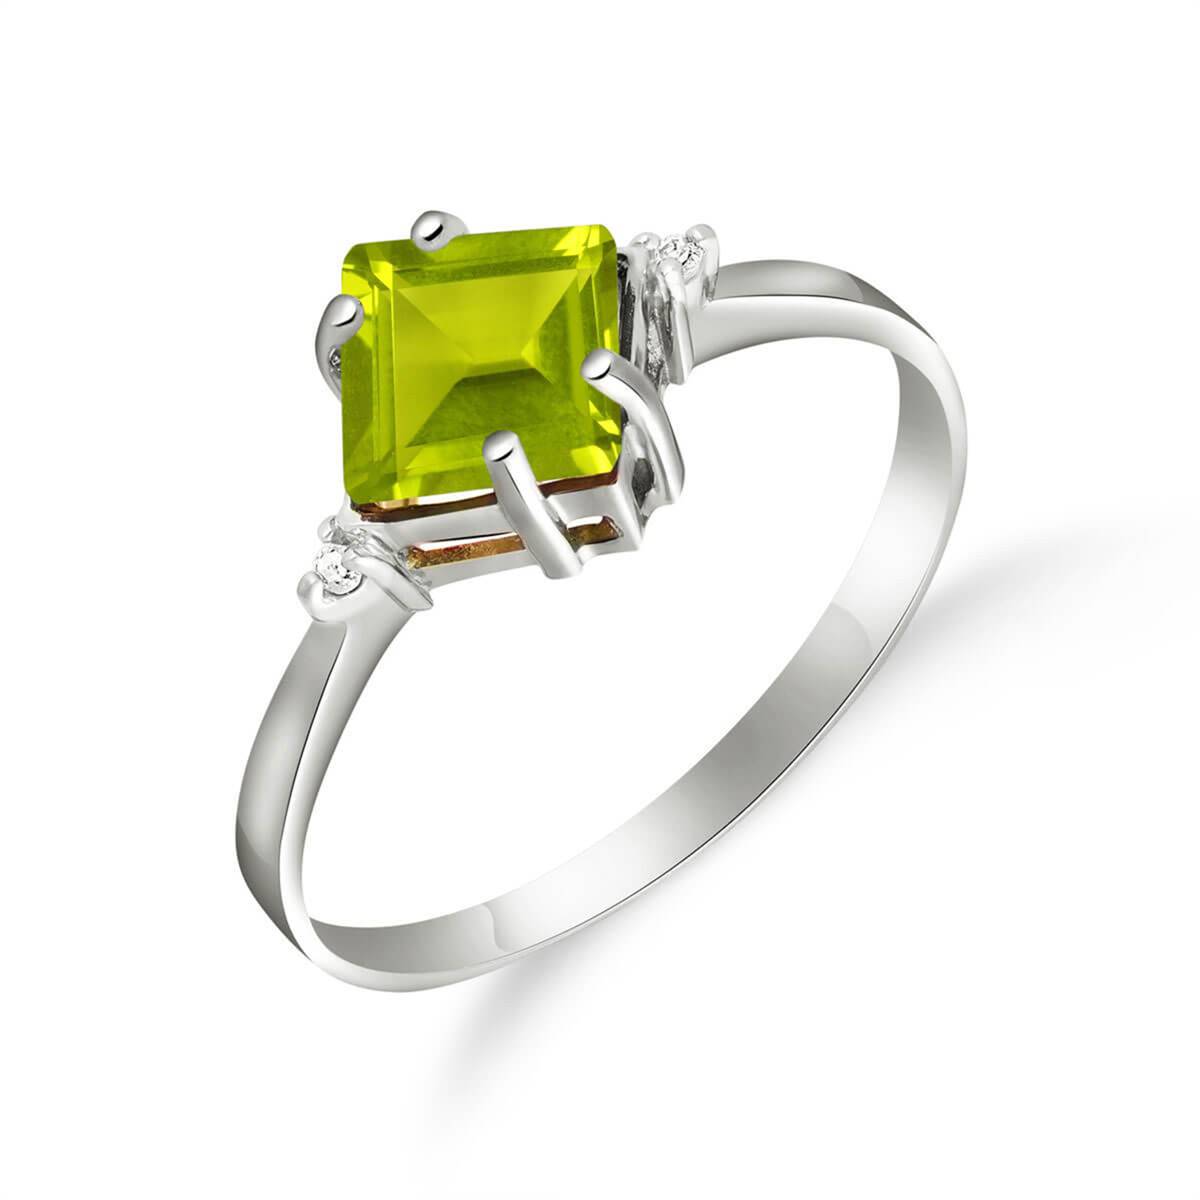 1.77 Carat 14K Solid White Gold Meant For Me Peridot Diamond Ring